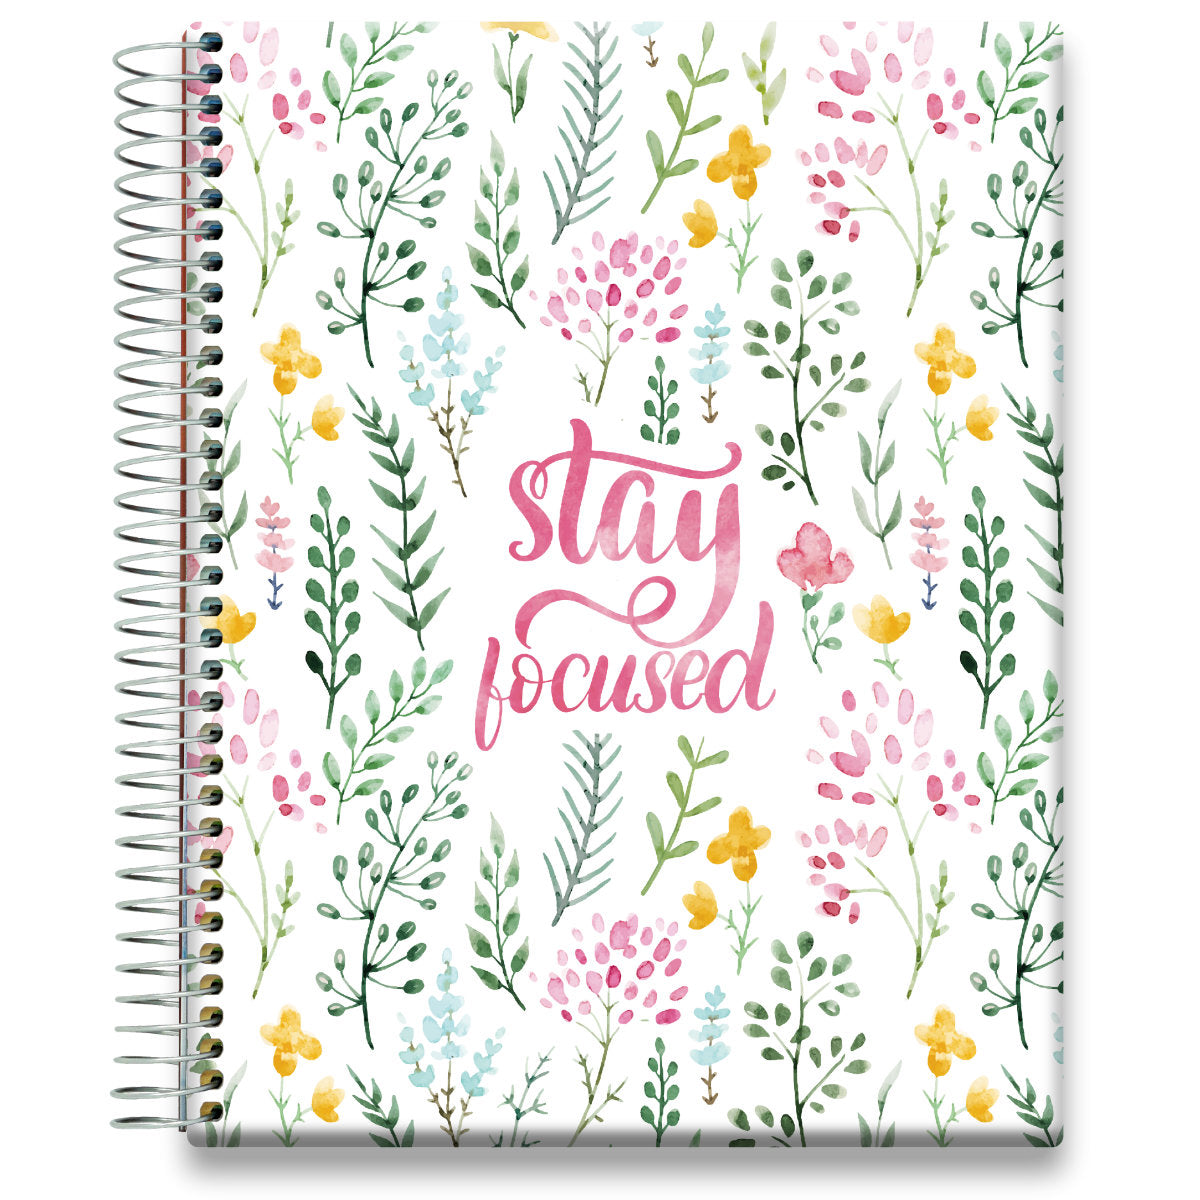 May 2024 to Jun 2025 Planner - Stay Focused Floral